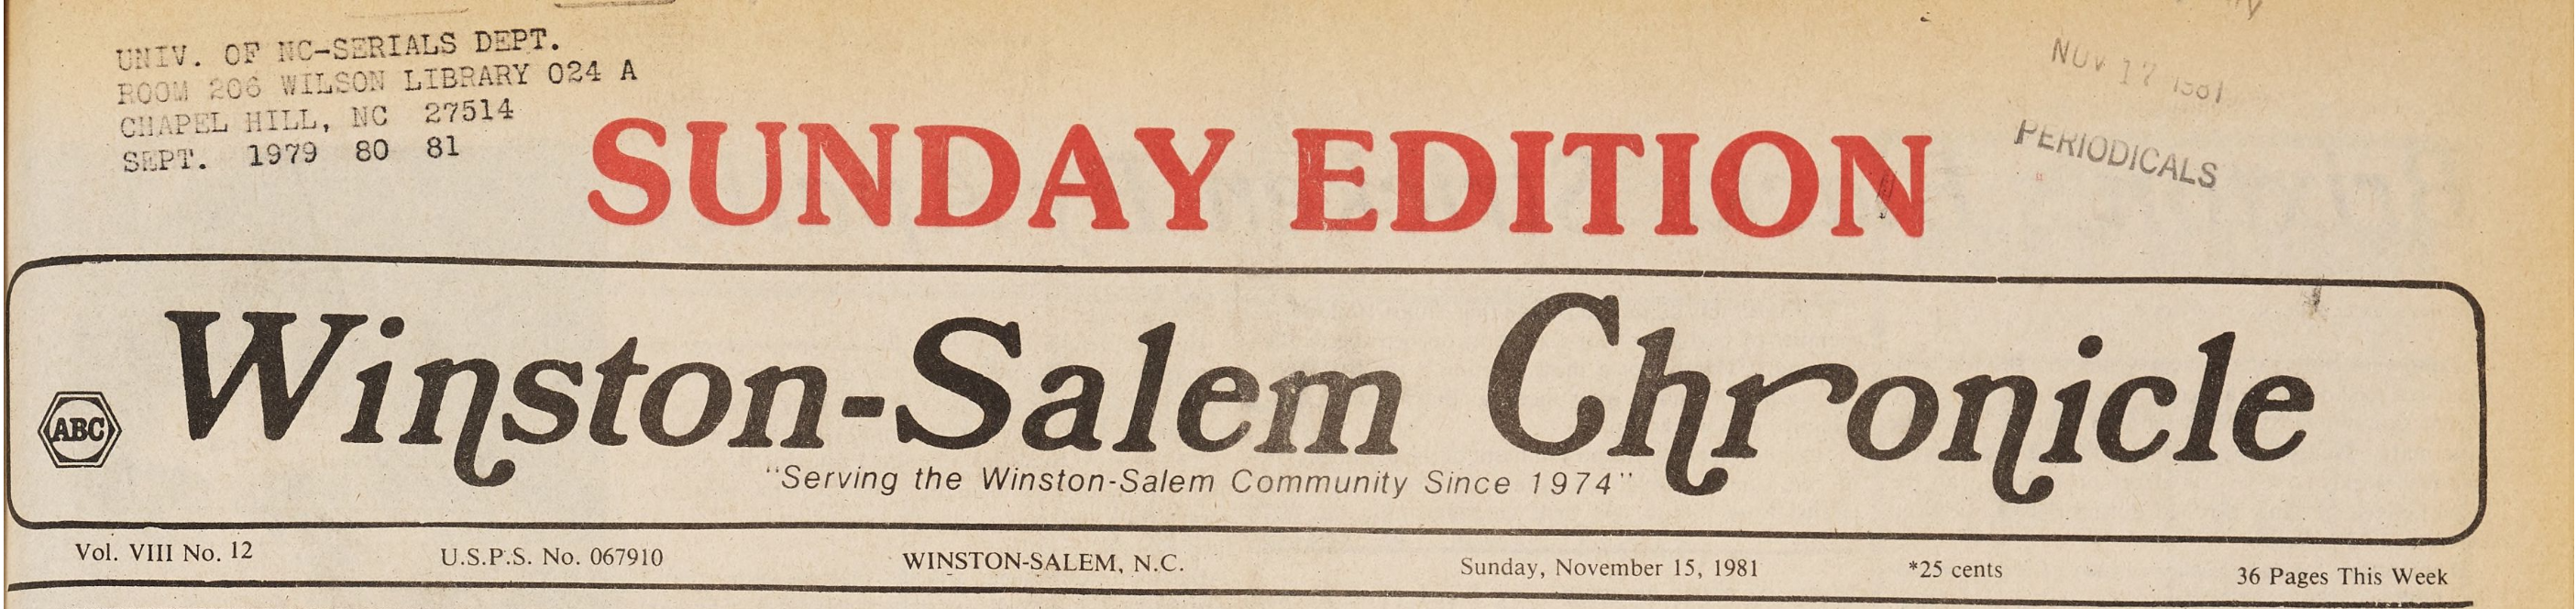 Winston-Salem Chronicle header. Above the header is bright red text saying Sunday Edition.